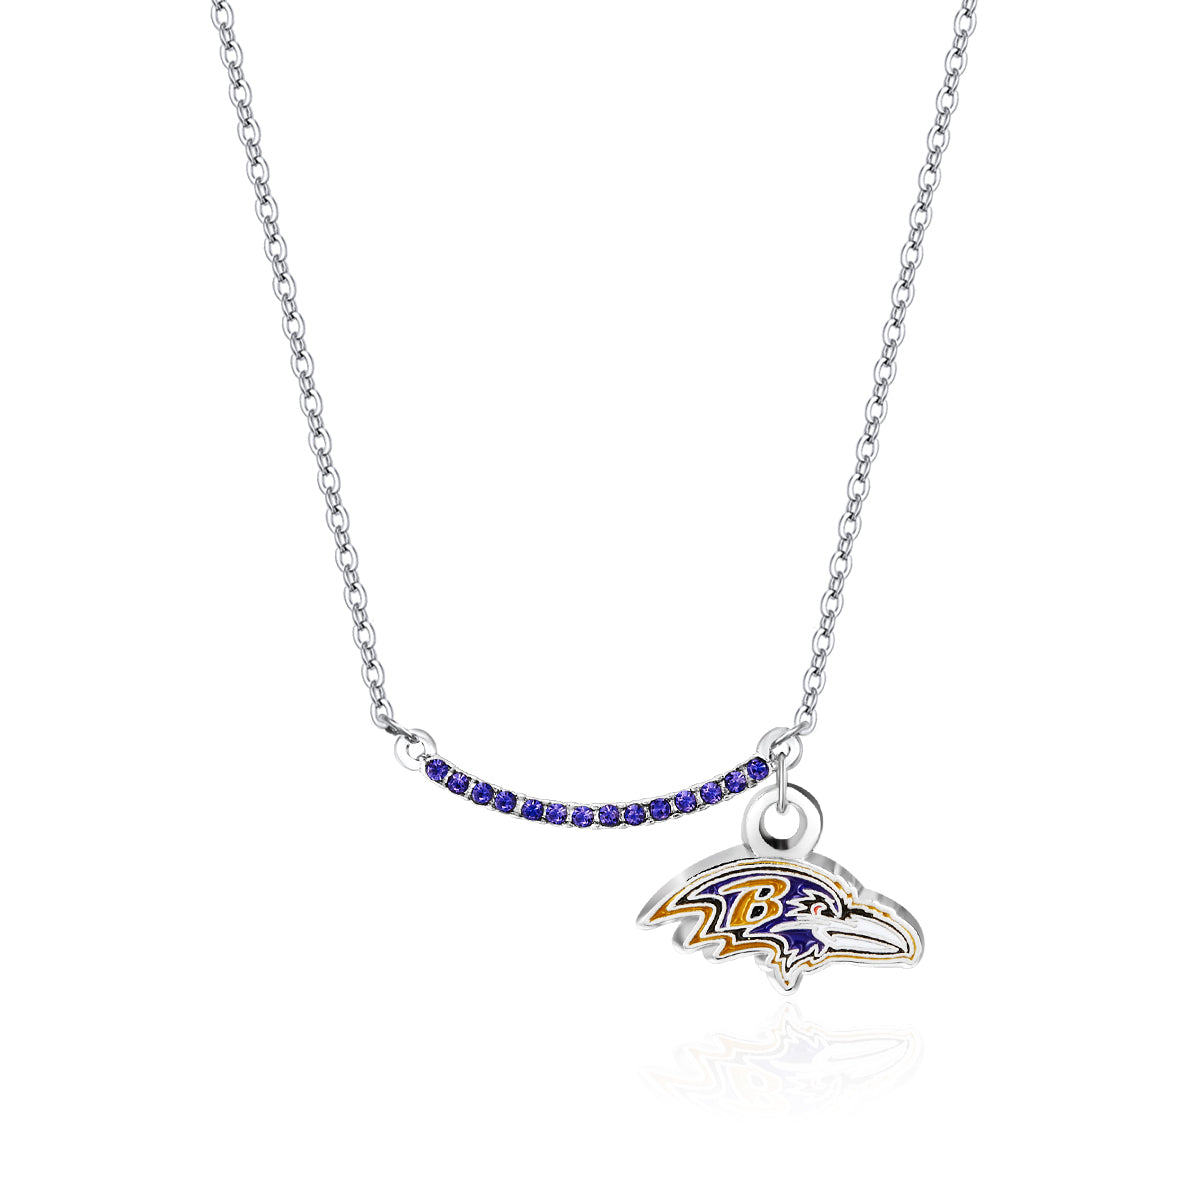 BALTIMORE RAVENS INFINITY NECKLACE